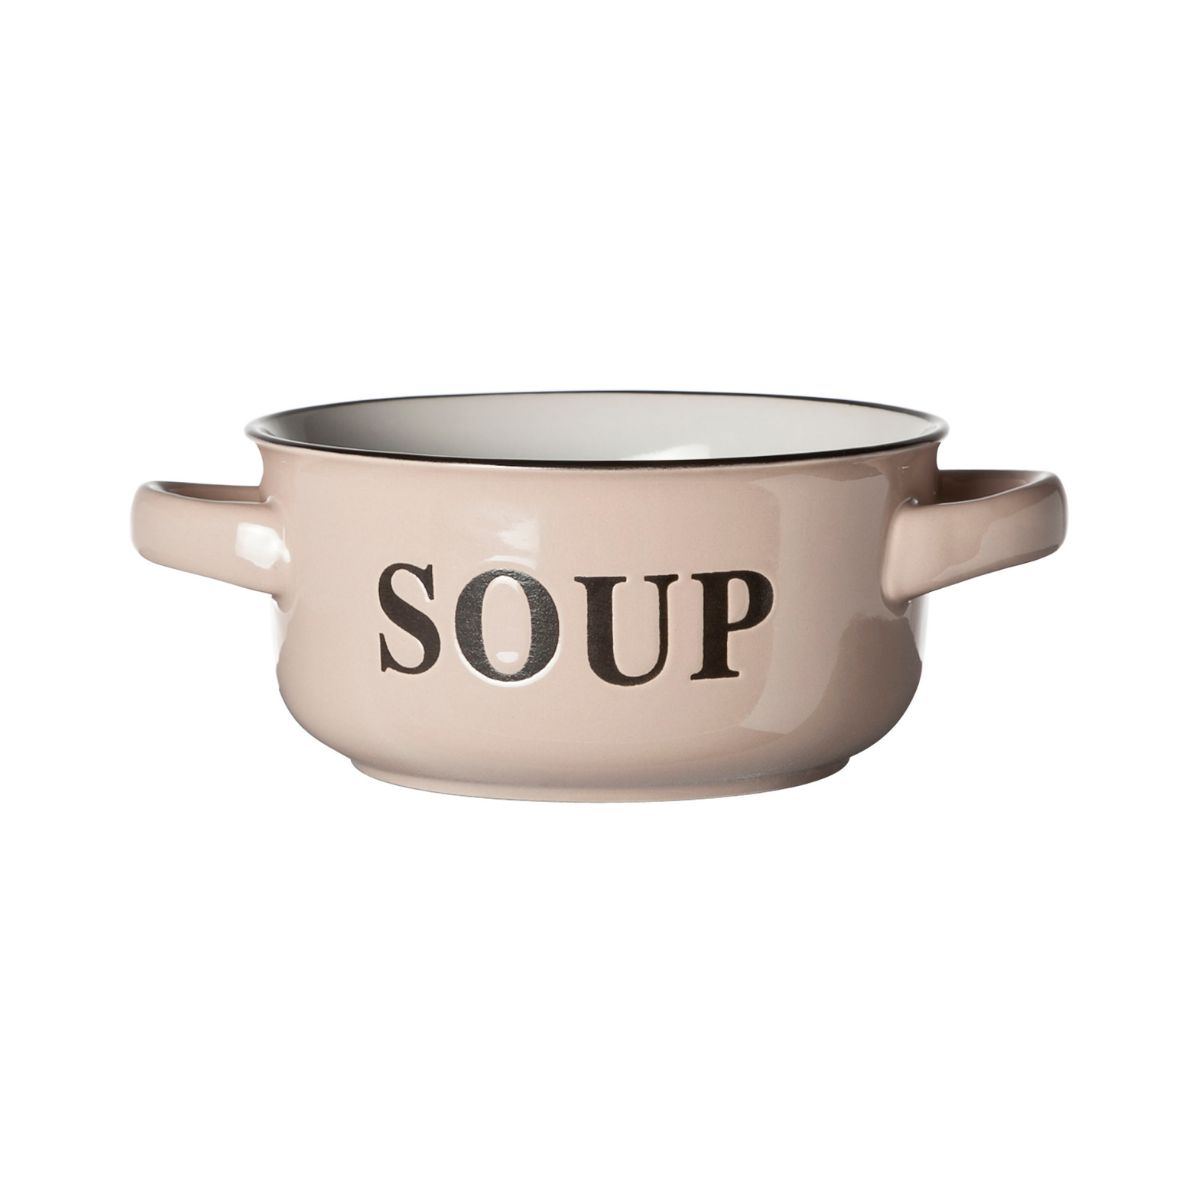 Bucatarie - Bol crem din material ceramic Ø13,5 cm Text Soup Cosy&Trendy, hectarul.ro